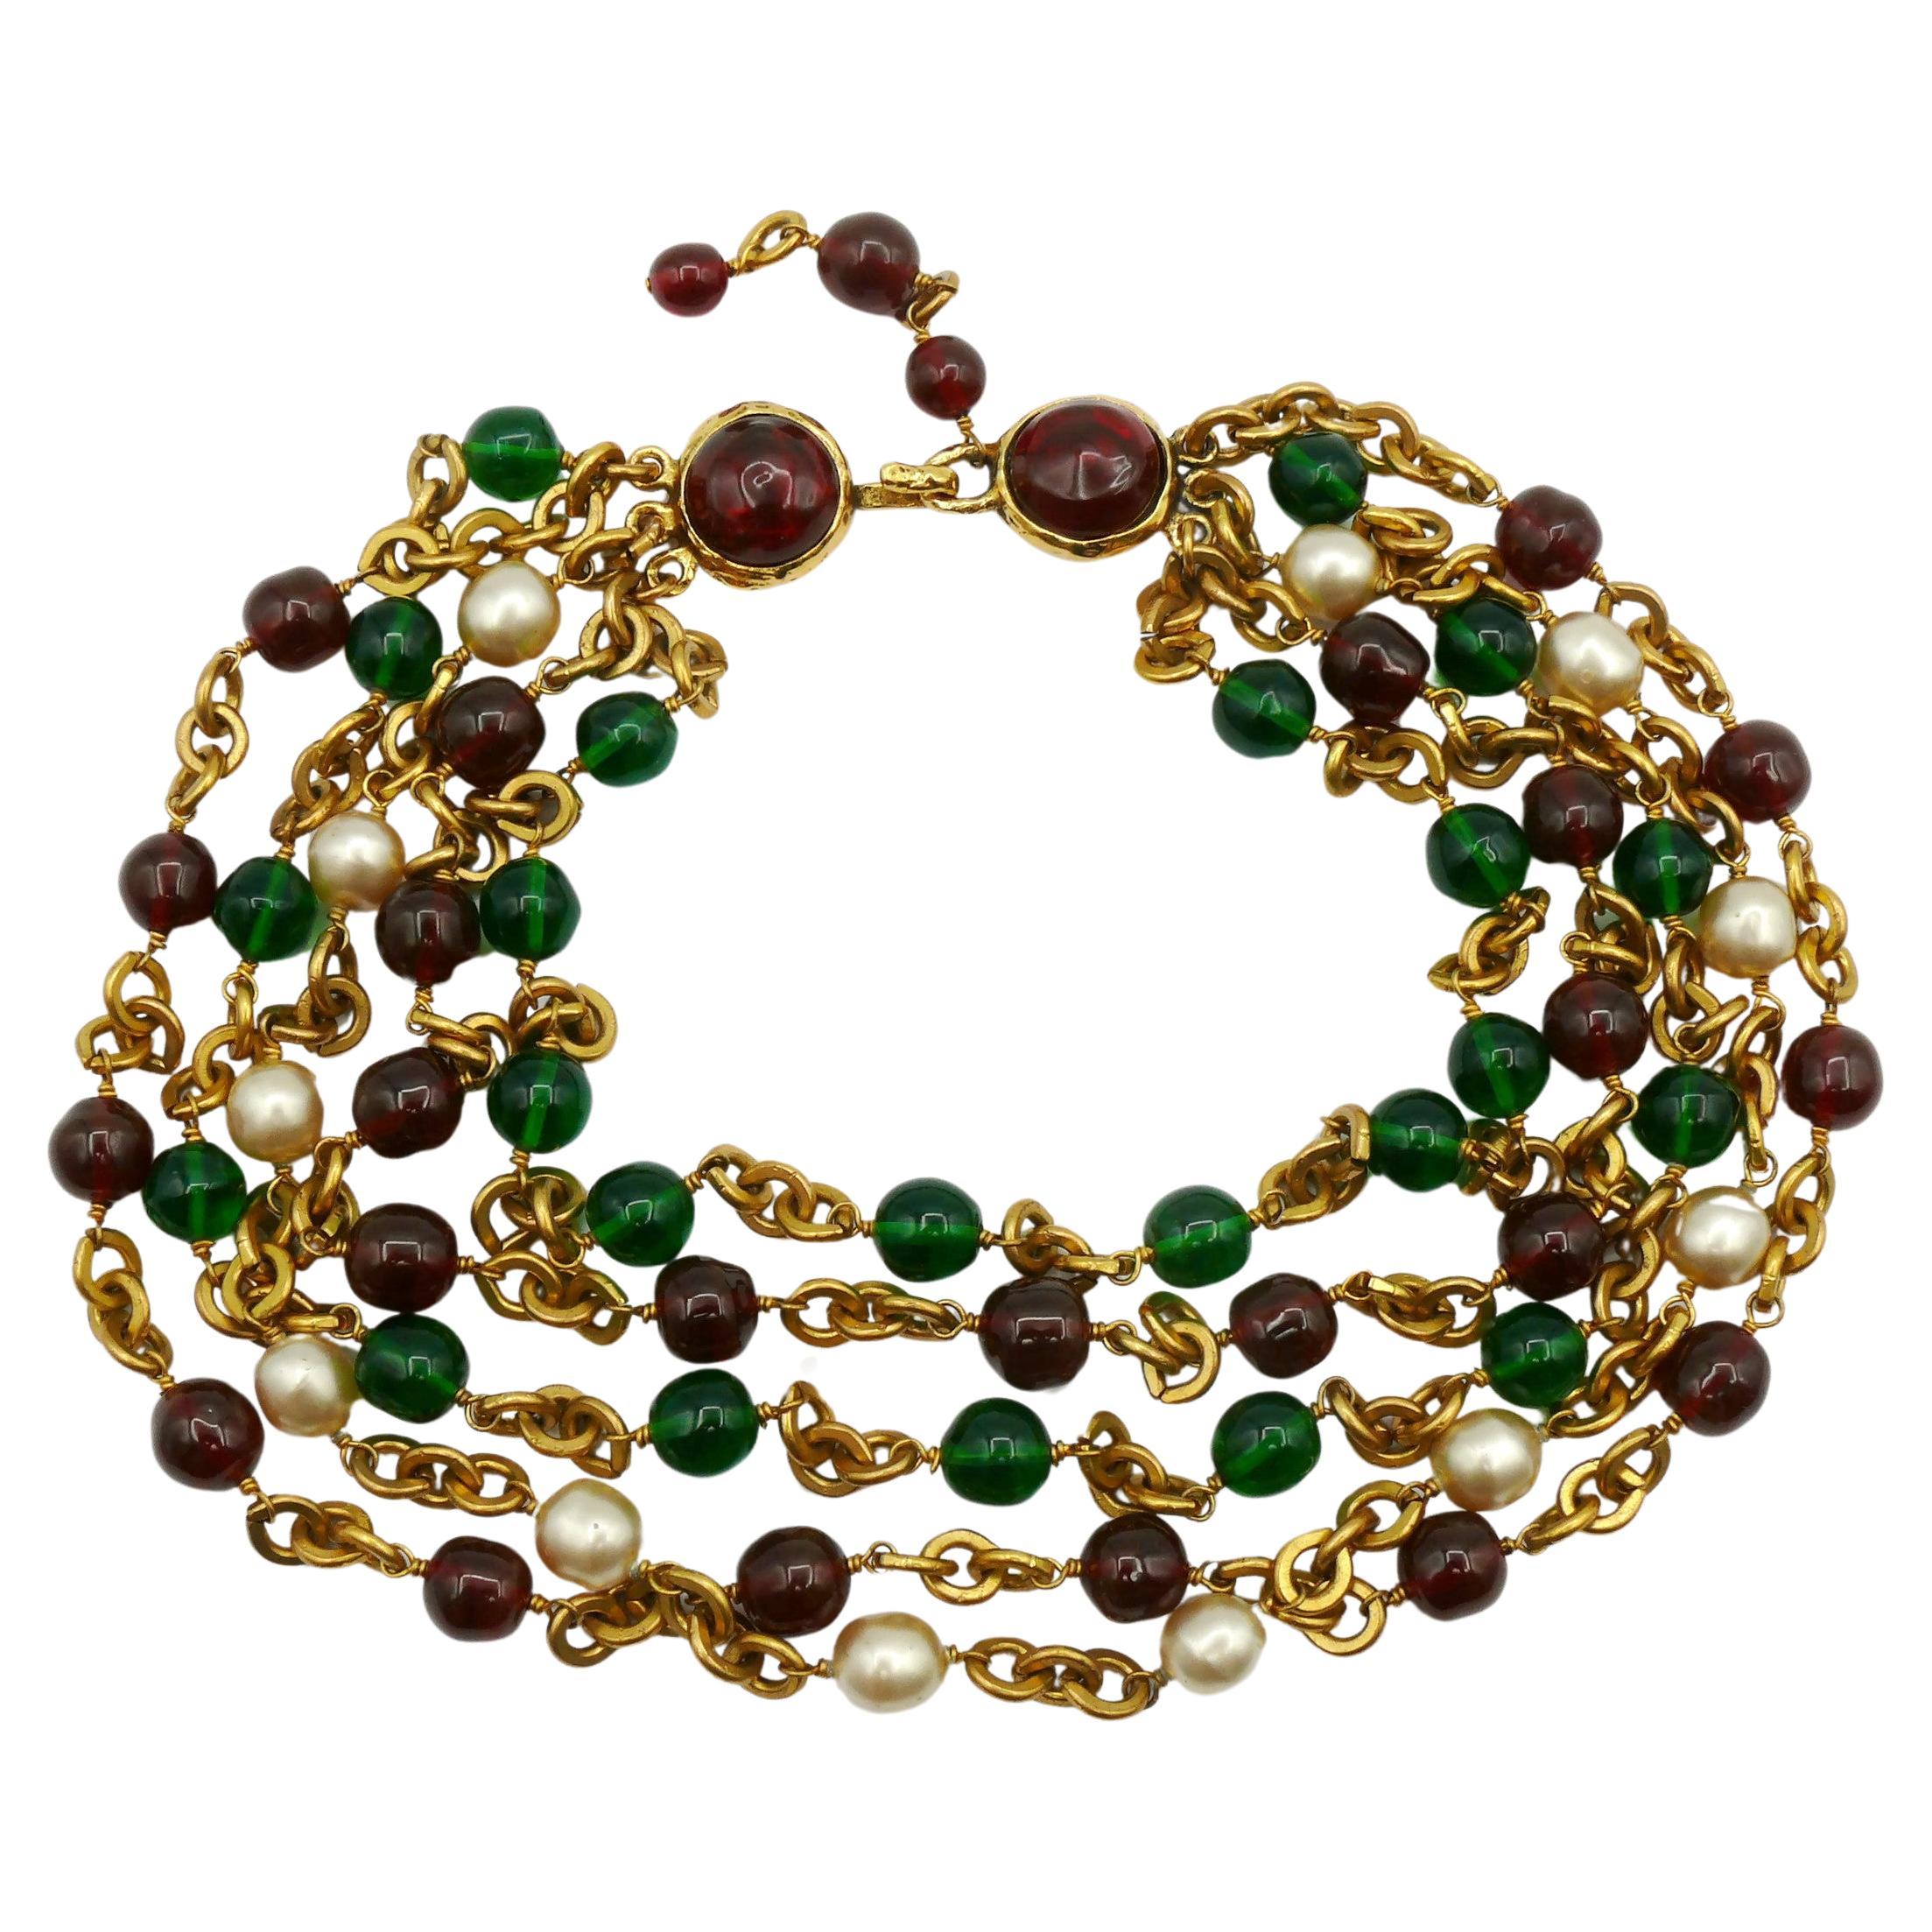 CHANEL by KARL LAGERFELD Vintage Triple Strand GRIPOIX Necklace, 1988 For Sale